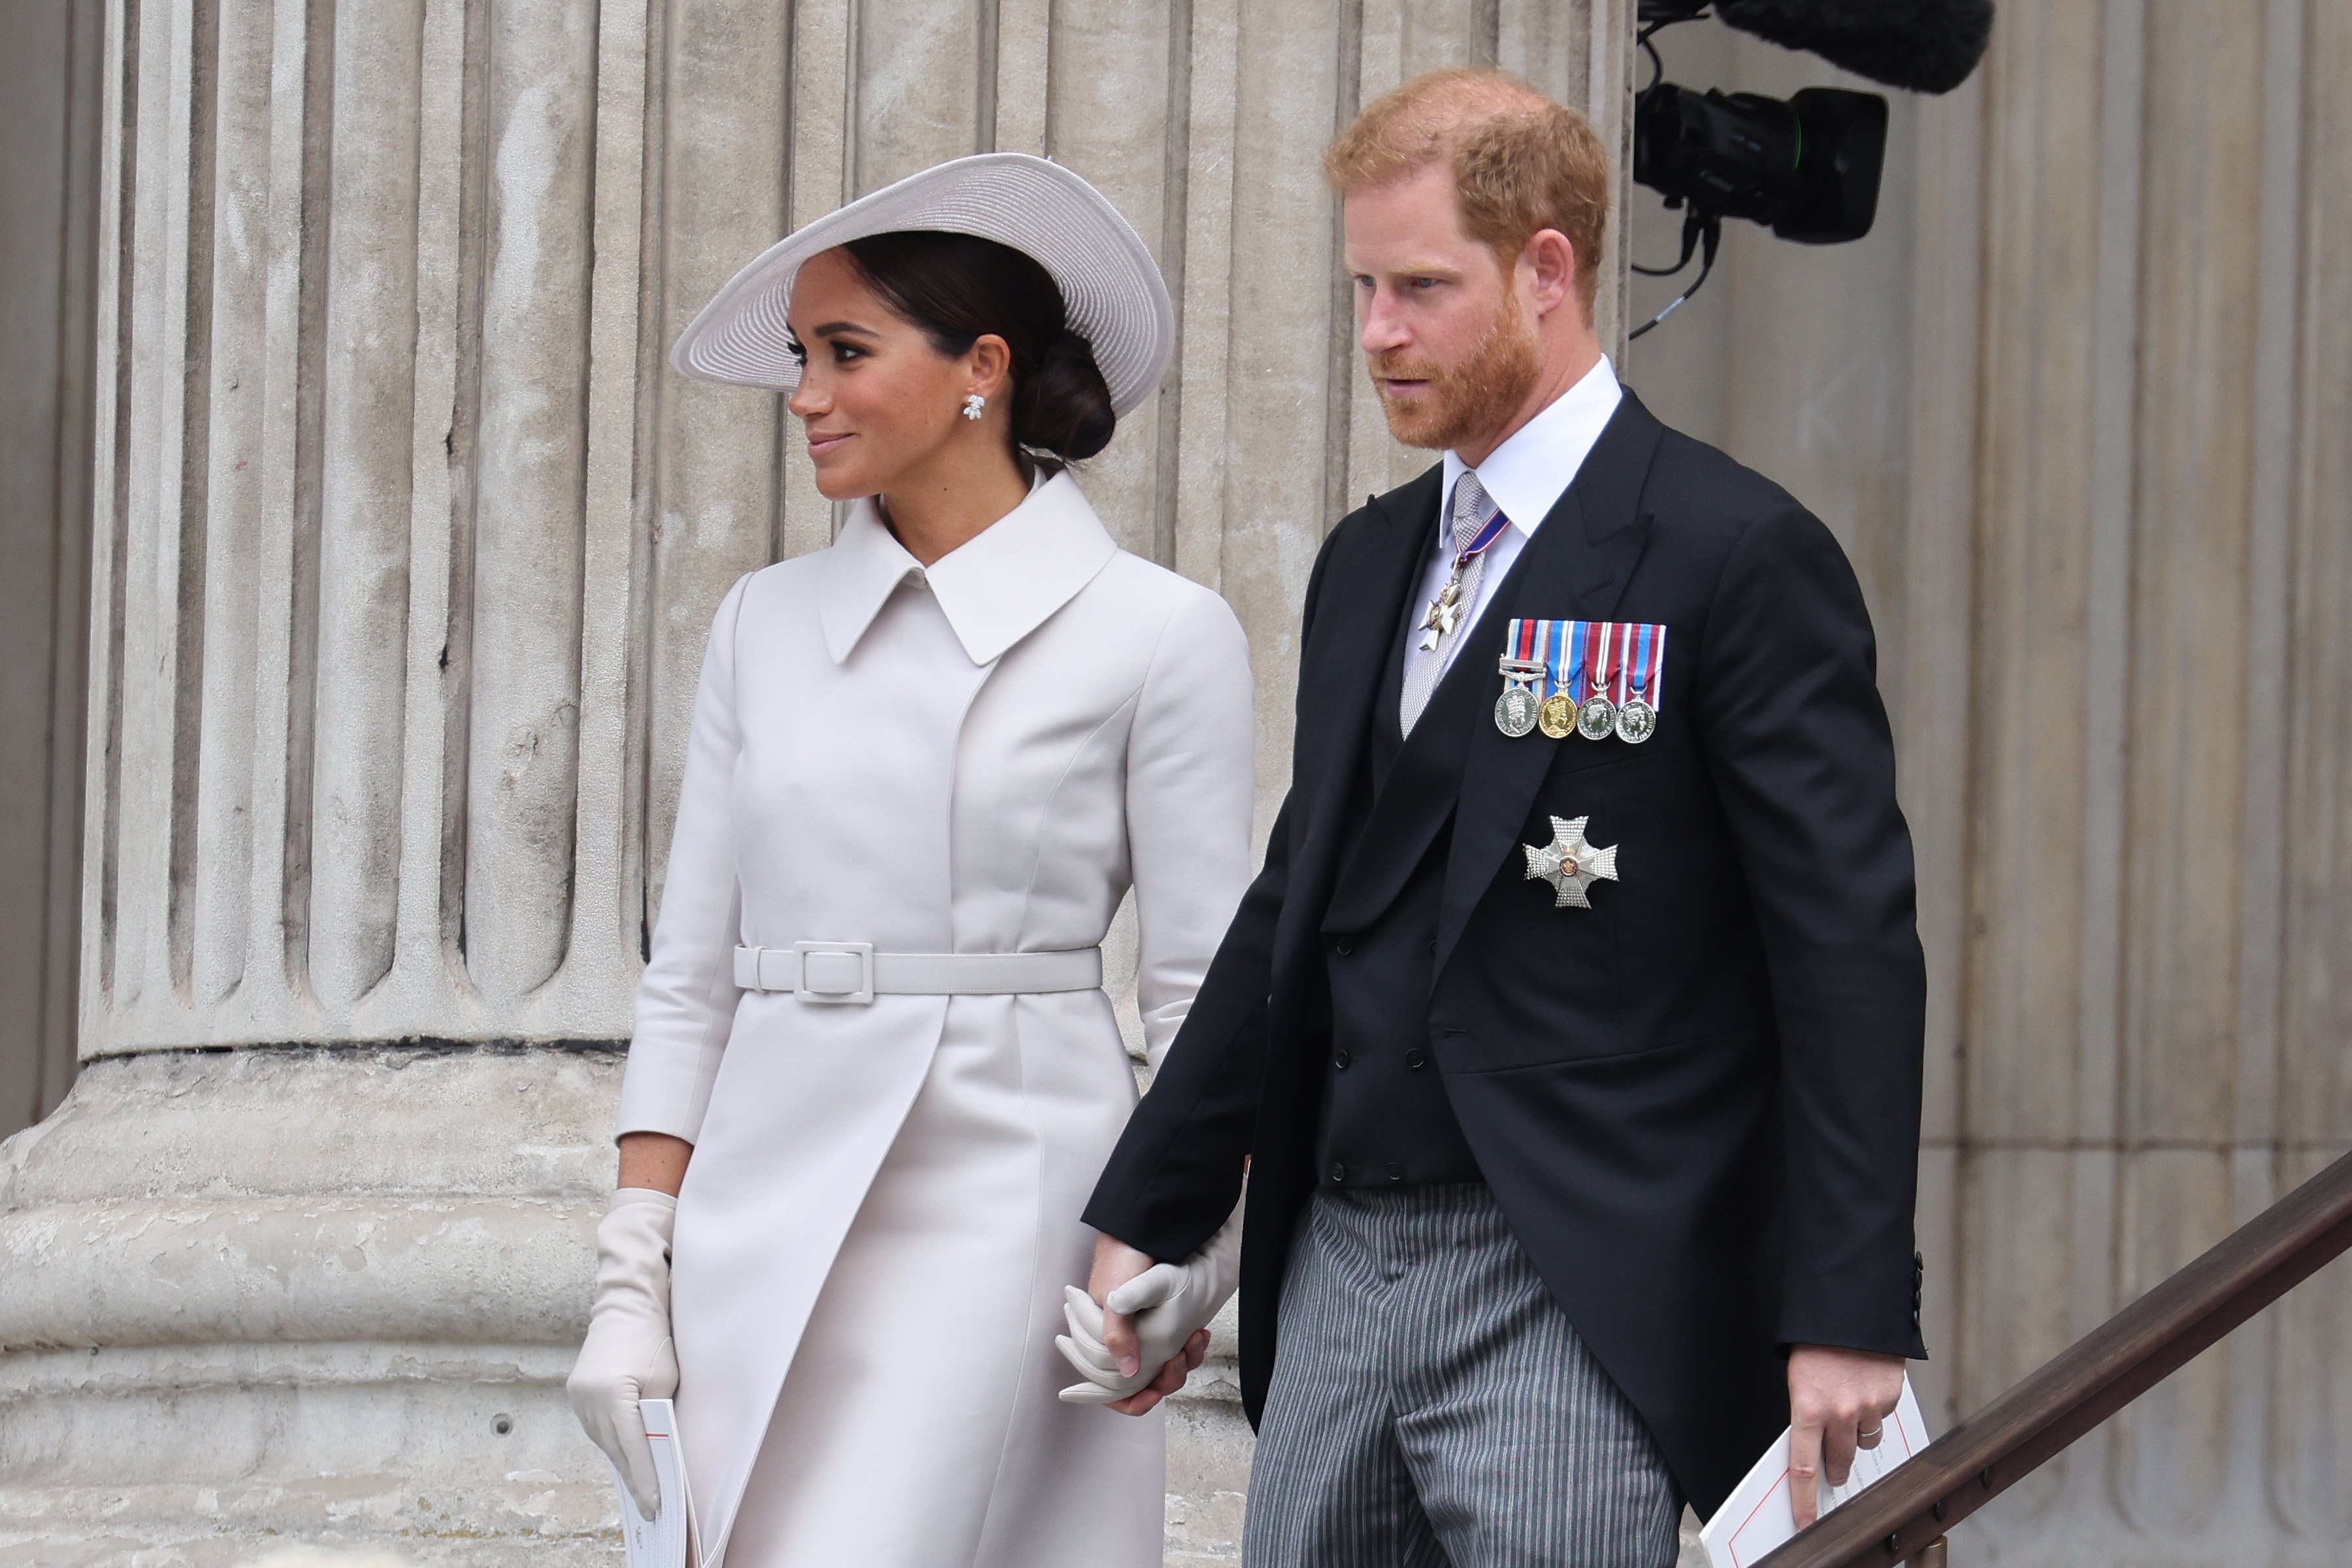 Duchess Meghan and Prince Harry departing St. Paul's Cathedral after the Queen's Platinum Jubilee National Service of Thanksgiving on June 3, 2022, in London, England. | Source: Getty Images